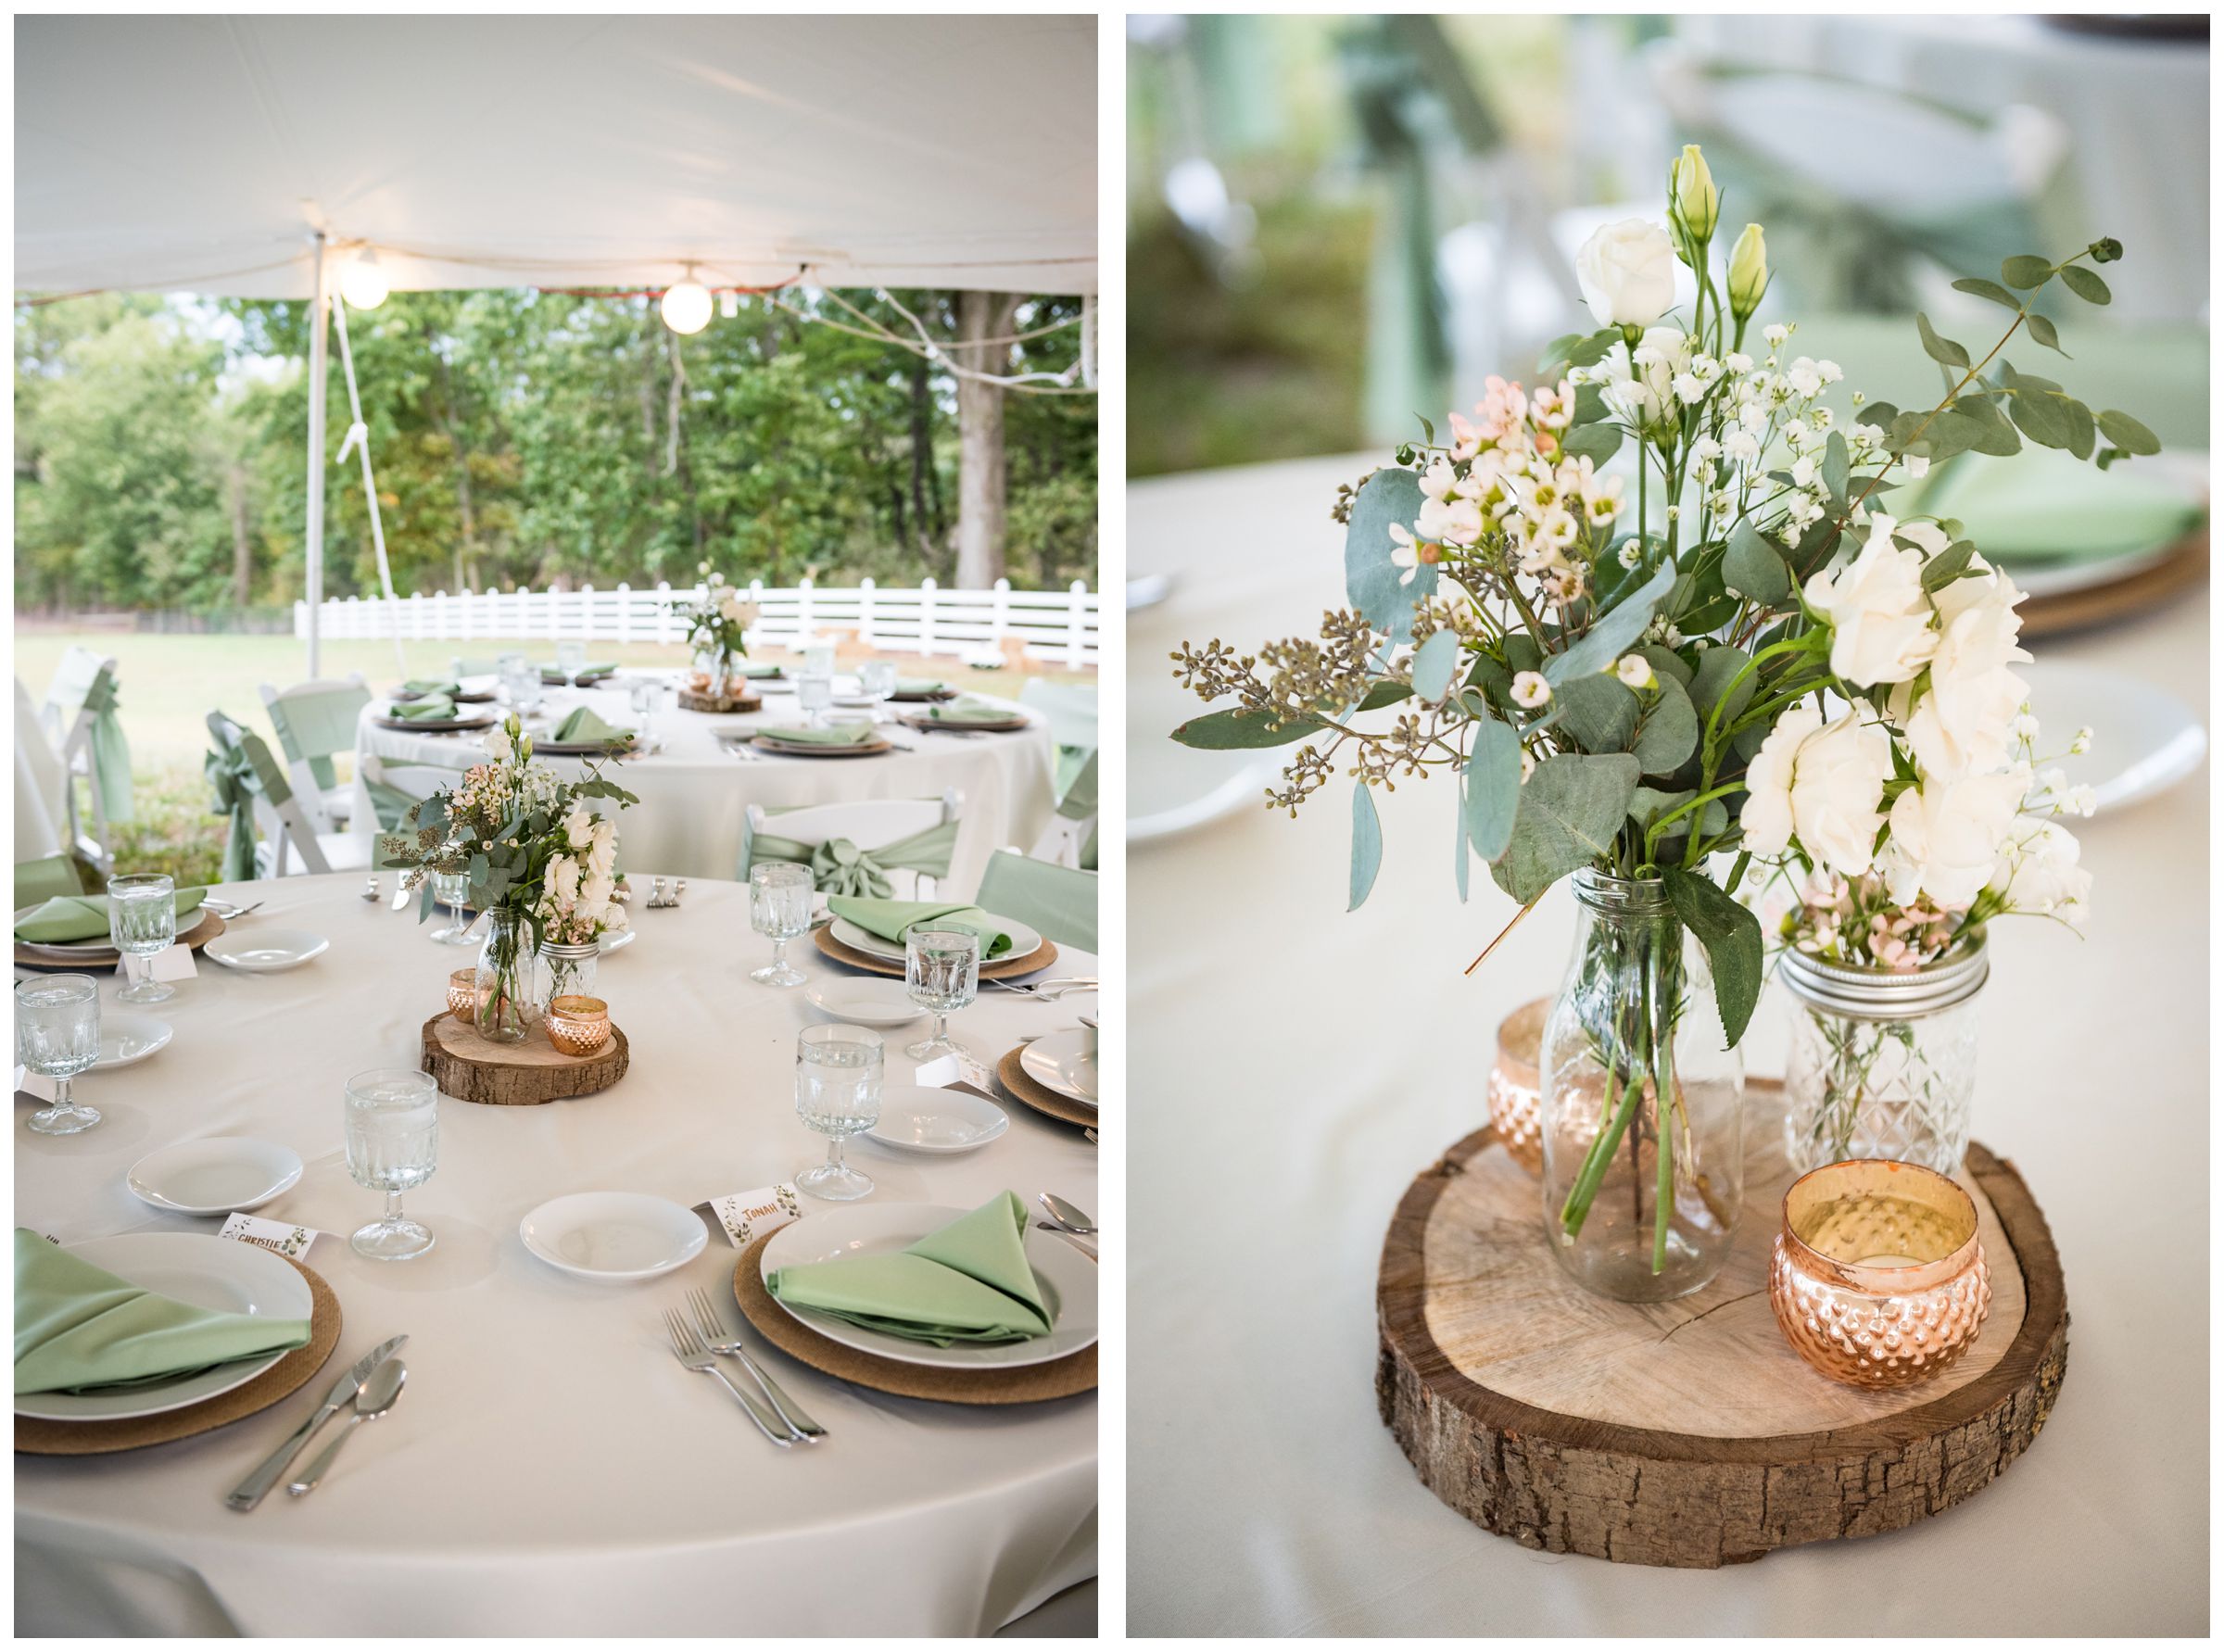 Fall rustic farm wedding details in mint green and blush pink with wood and greenery